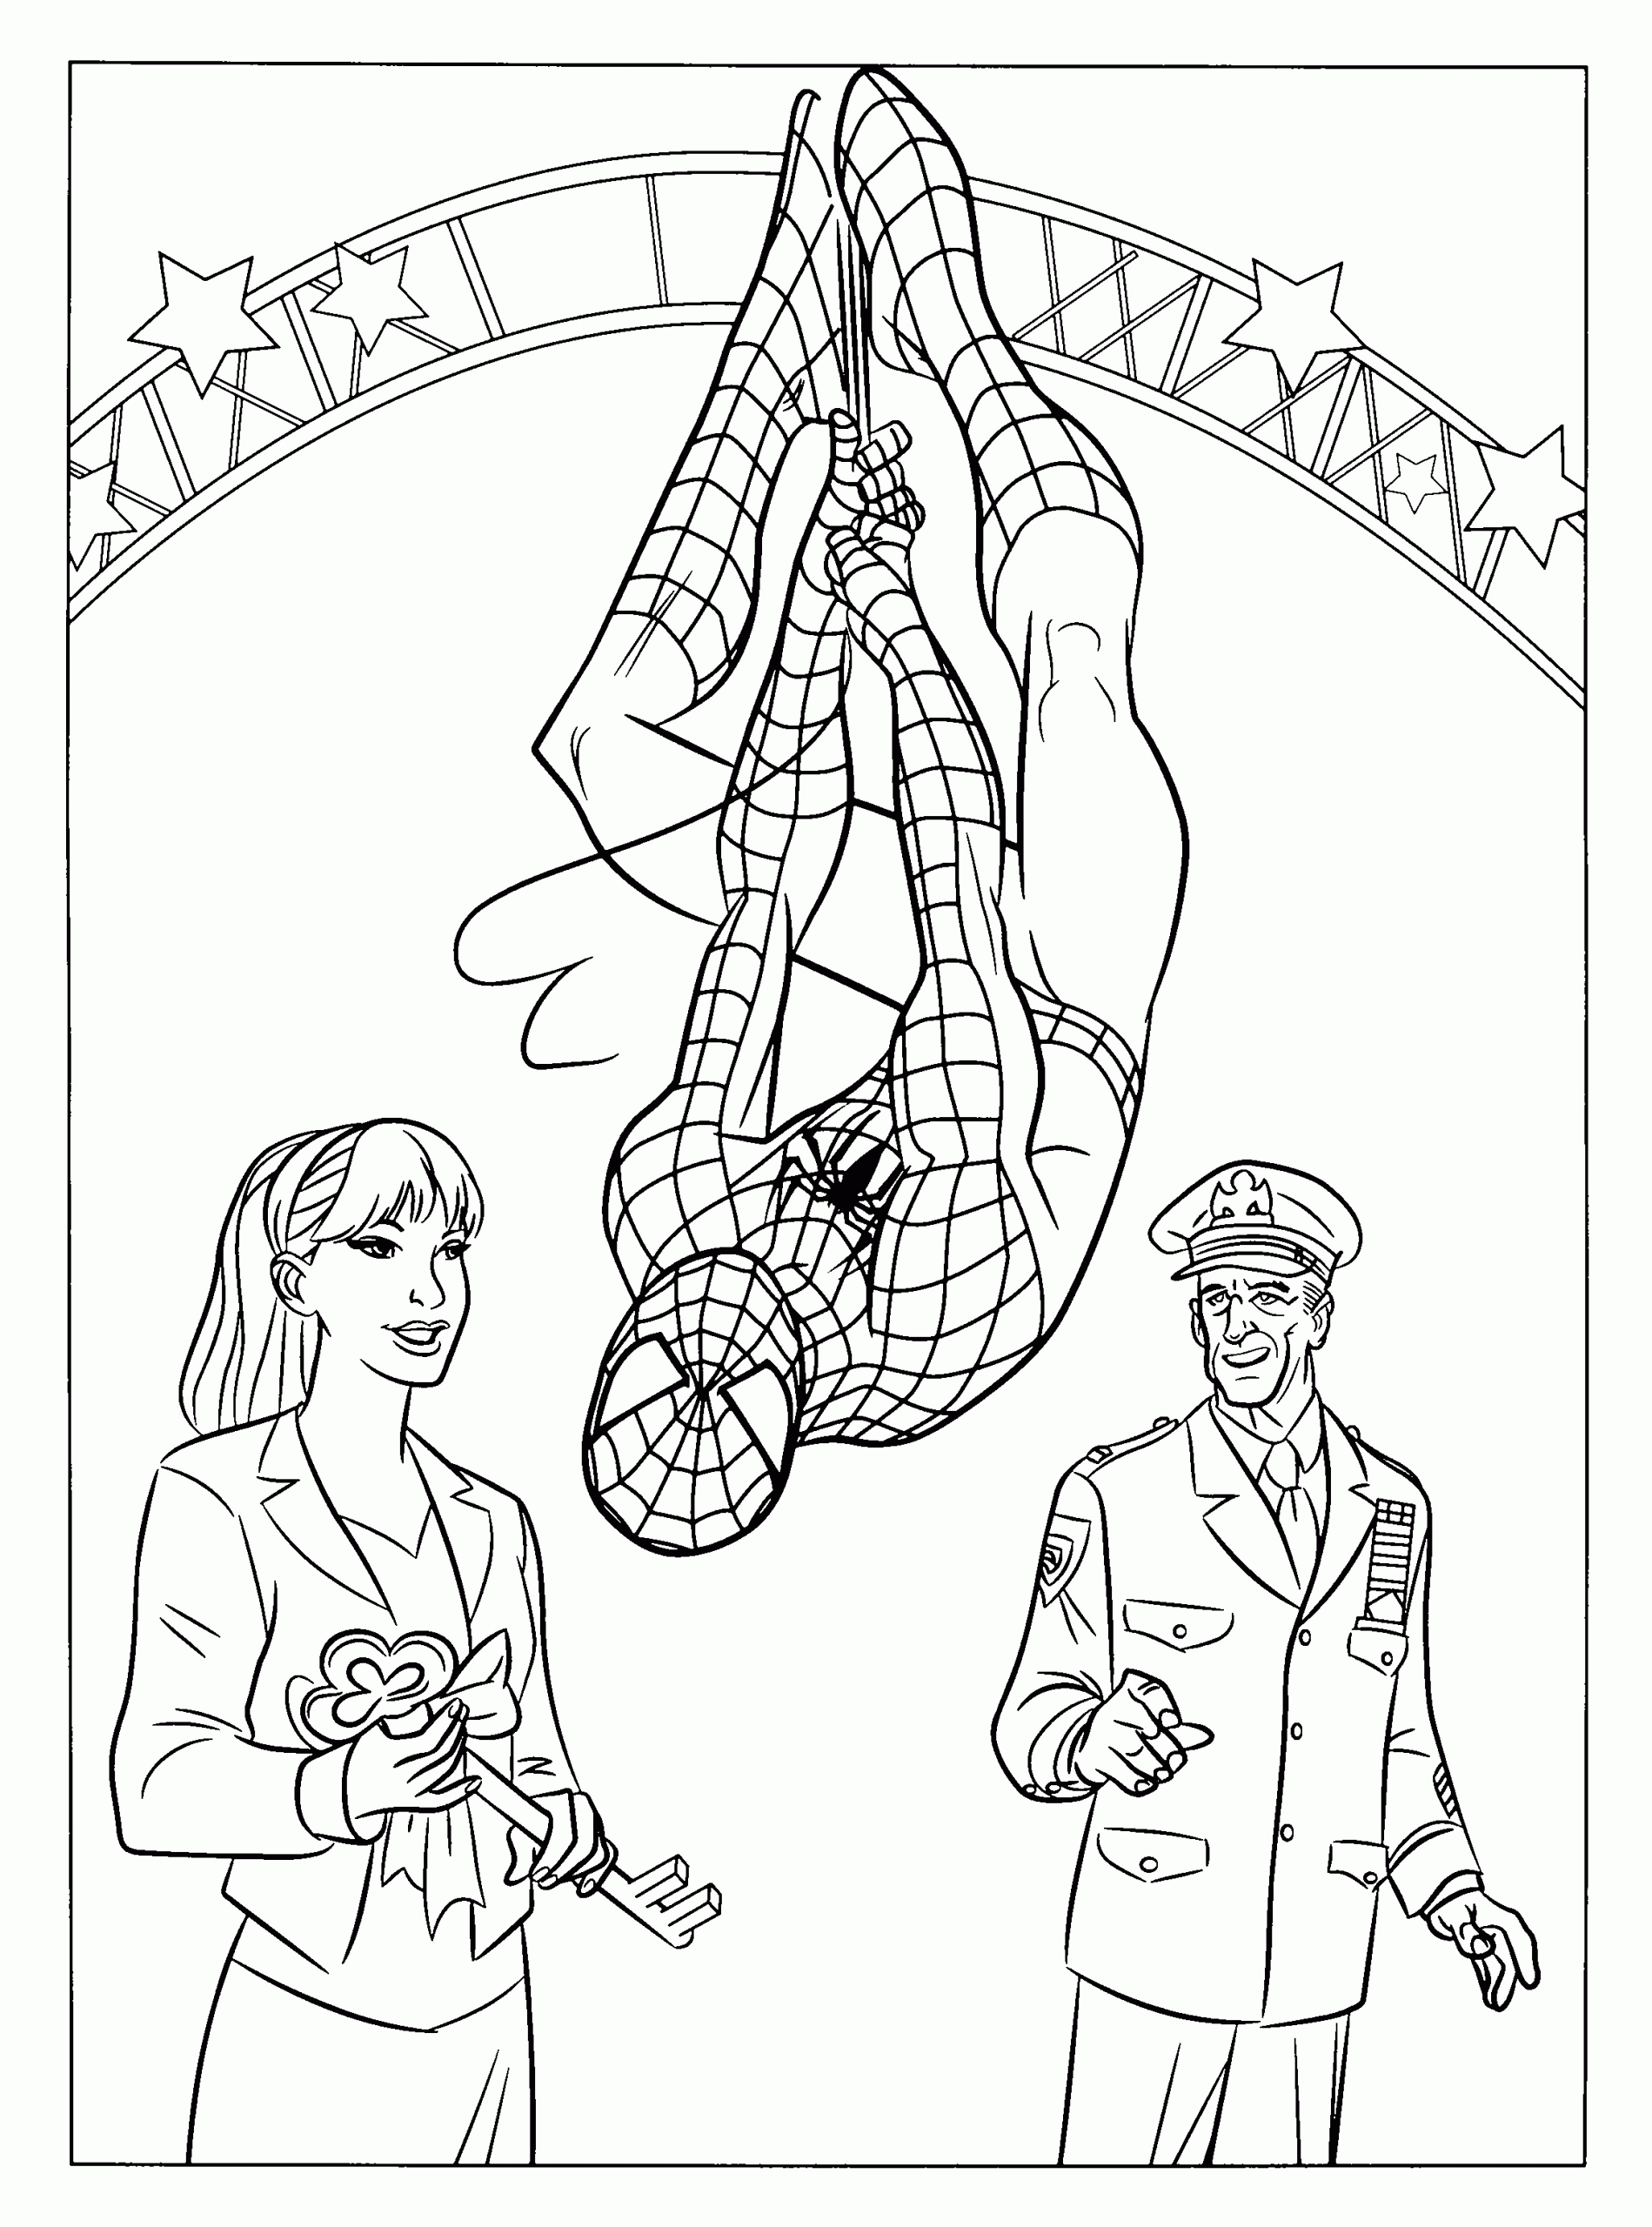 Coloring Pages For Kids Spiderman
 Free Printable Spiderman Coloring Pages For Kids